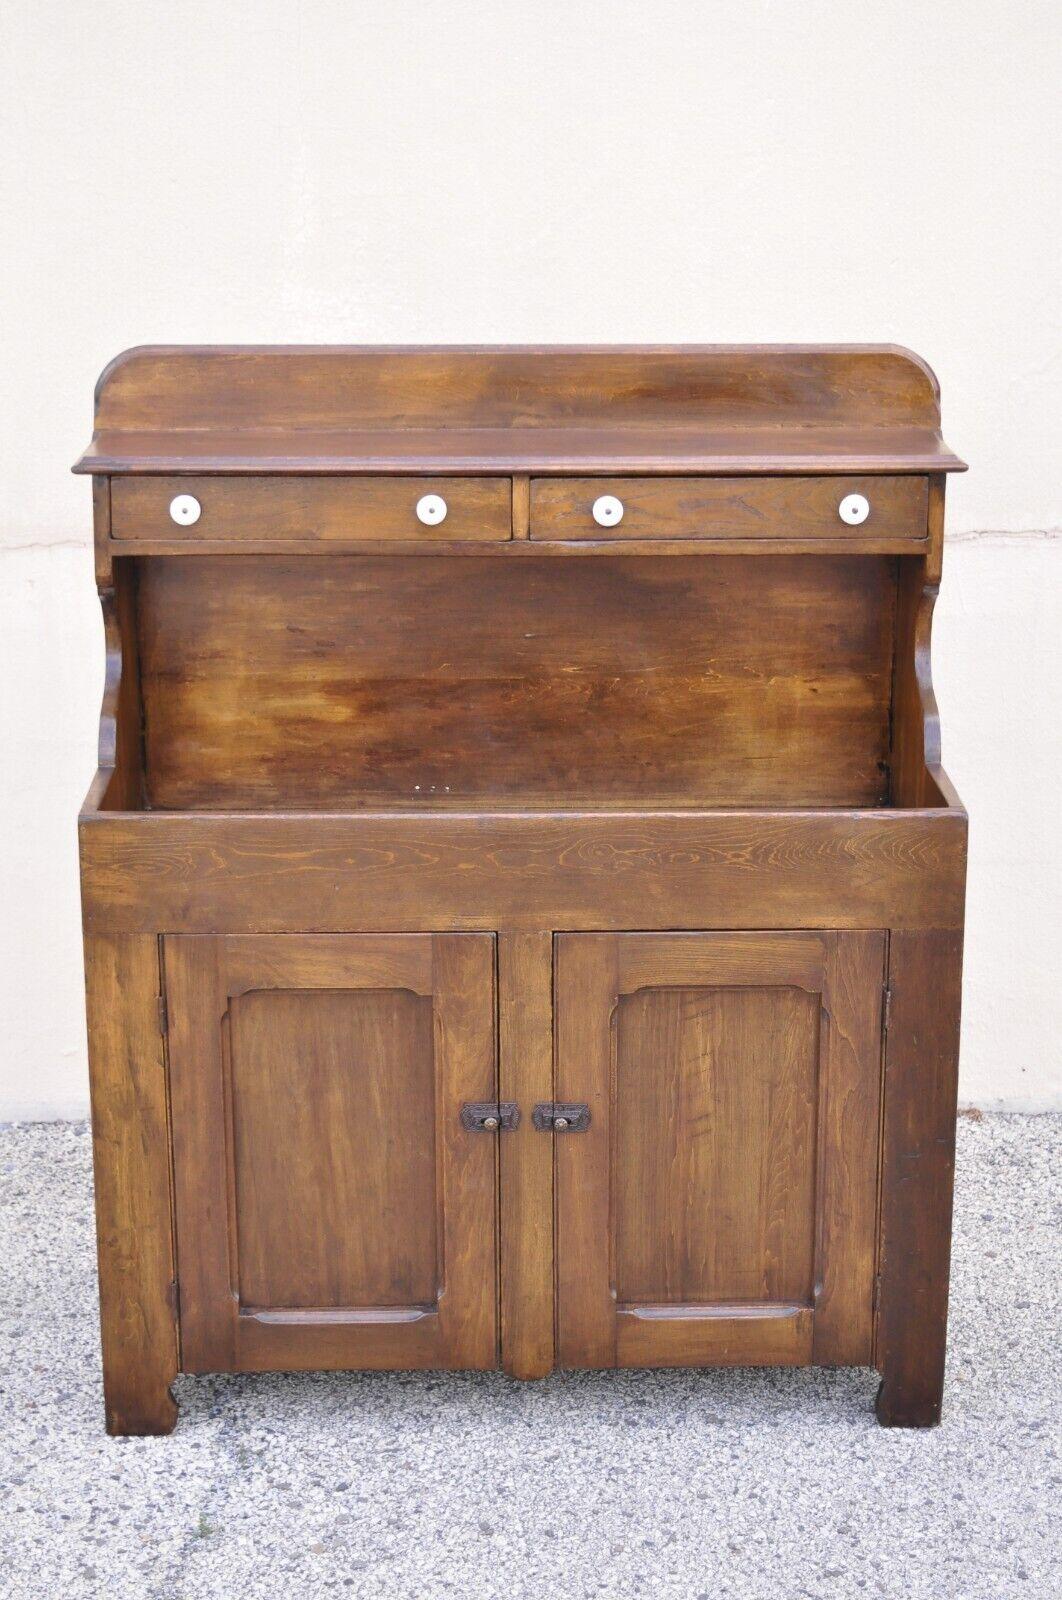 Antique American colonial primitive pine wood stepback drysink hutch cupboard. Item features a solid wood construction, beautiful wood grain, distressed finish, 2 swing doors, 2 drawers, very nice antique item, looks to have been professionally